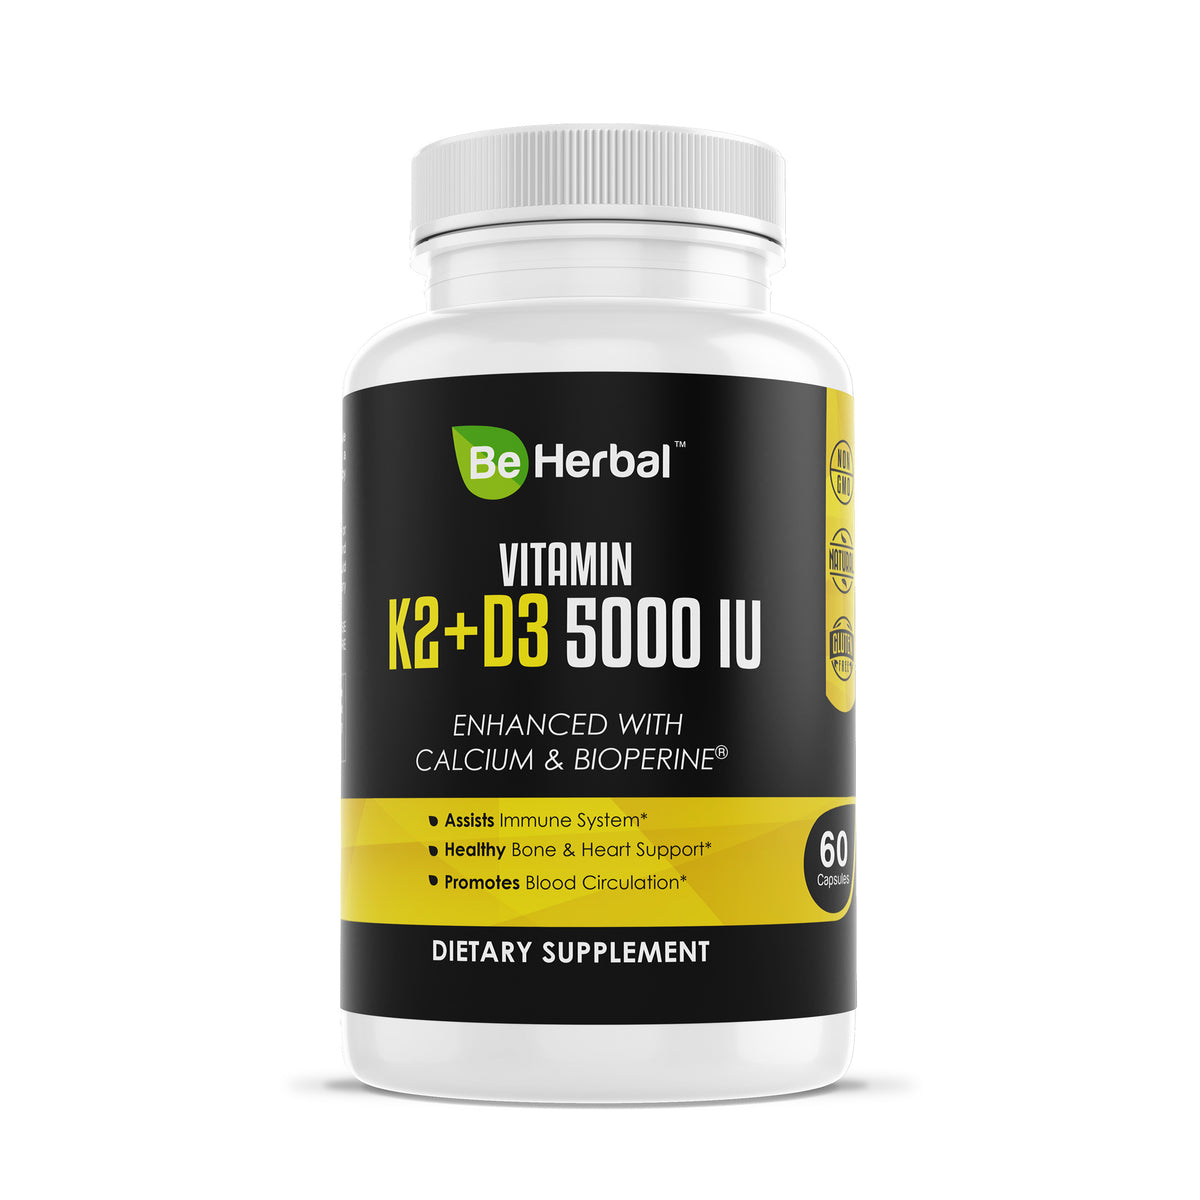 Vitamin K2 with D3 5000 IU - Enhanced with Calcium and BioPerine